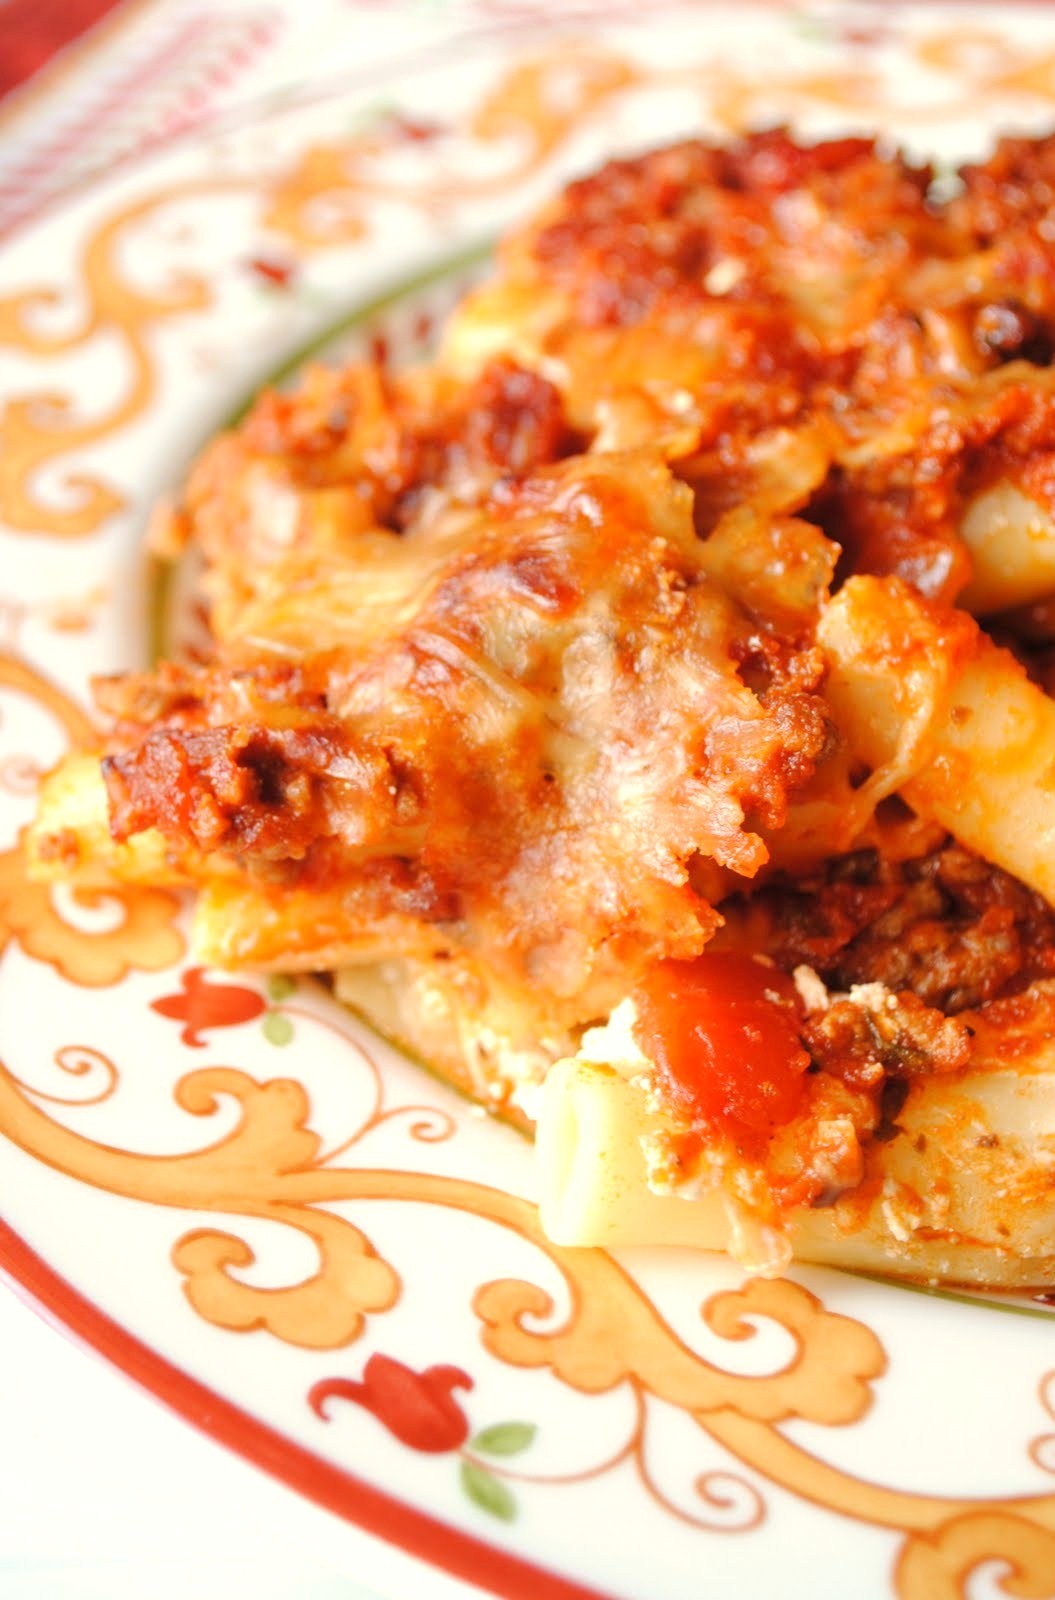 Baked Ziti - How To: Simplify